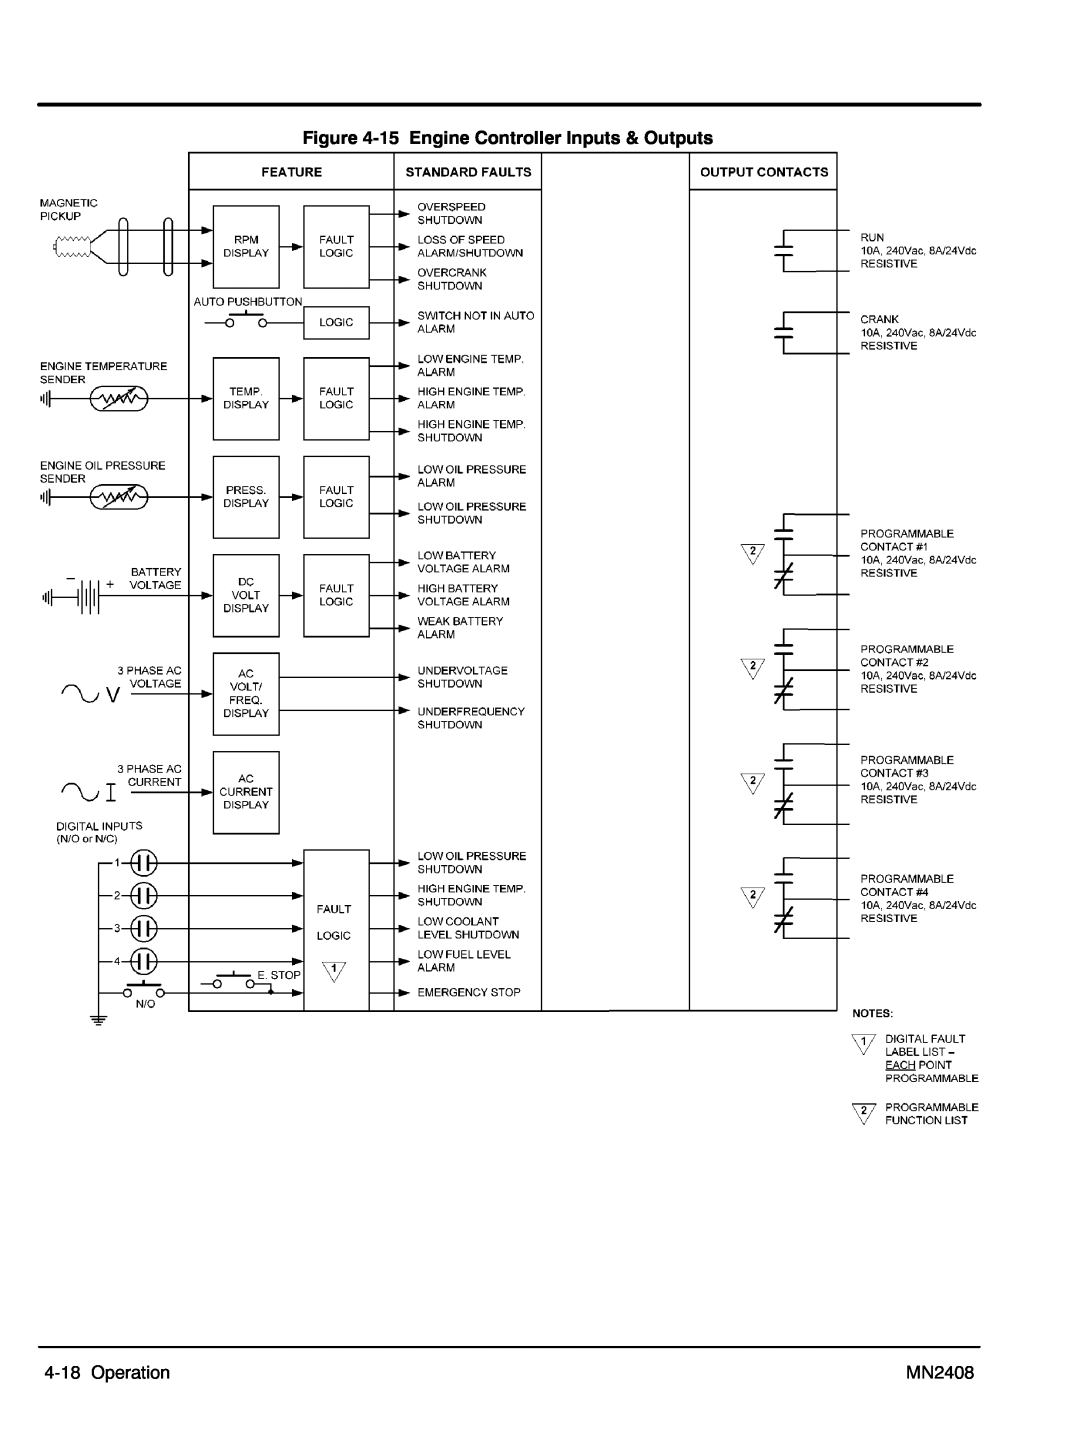 Baldor GLC45, GLC60, GLC105, GLC20, GLC65, GLC30, GLC100 manual ‐15 Engine Controller Inputs & Outputs, 4‐18 Operation, MN2408 